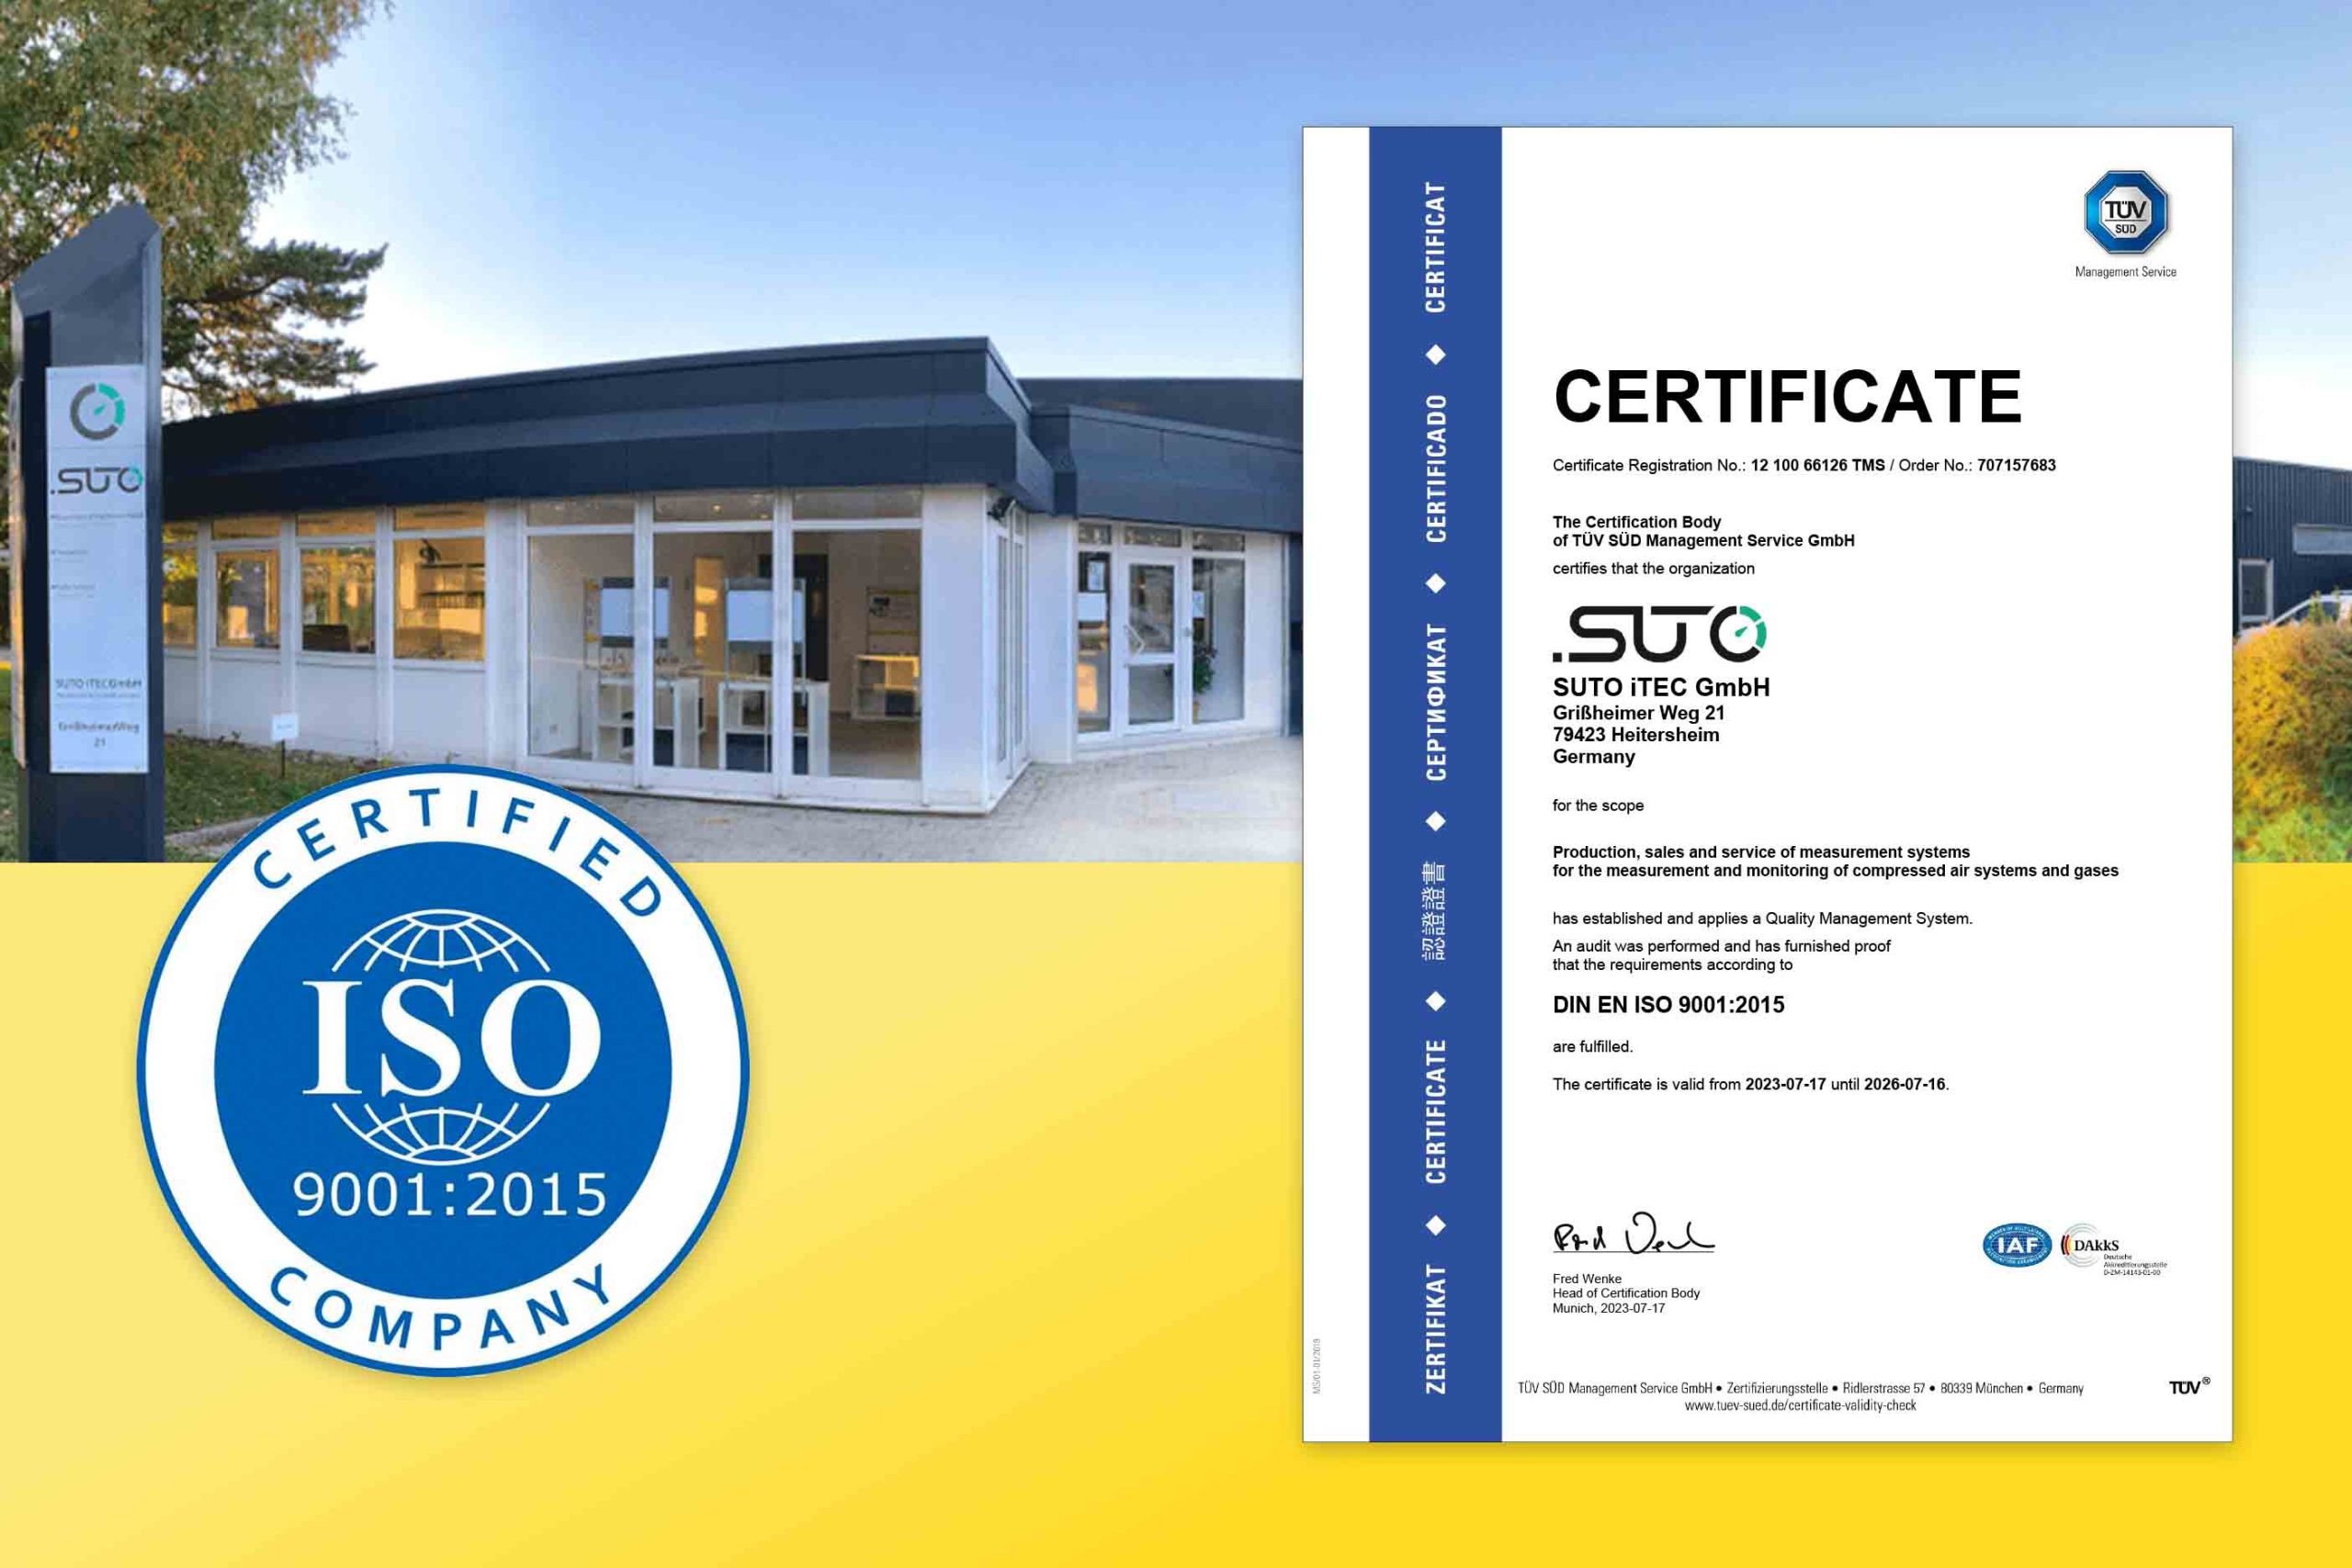 SUTO iTEC Headquarters in Germany Obtains ISO 9001:2015 Certification